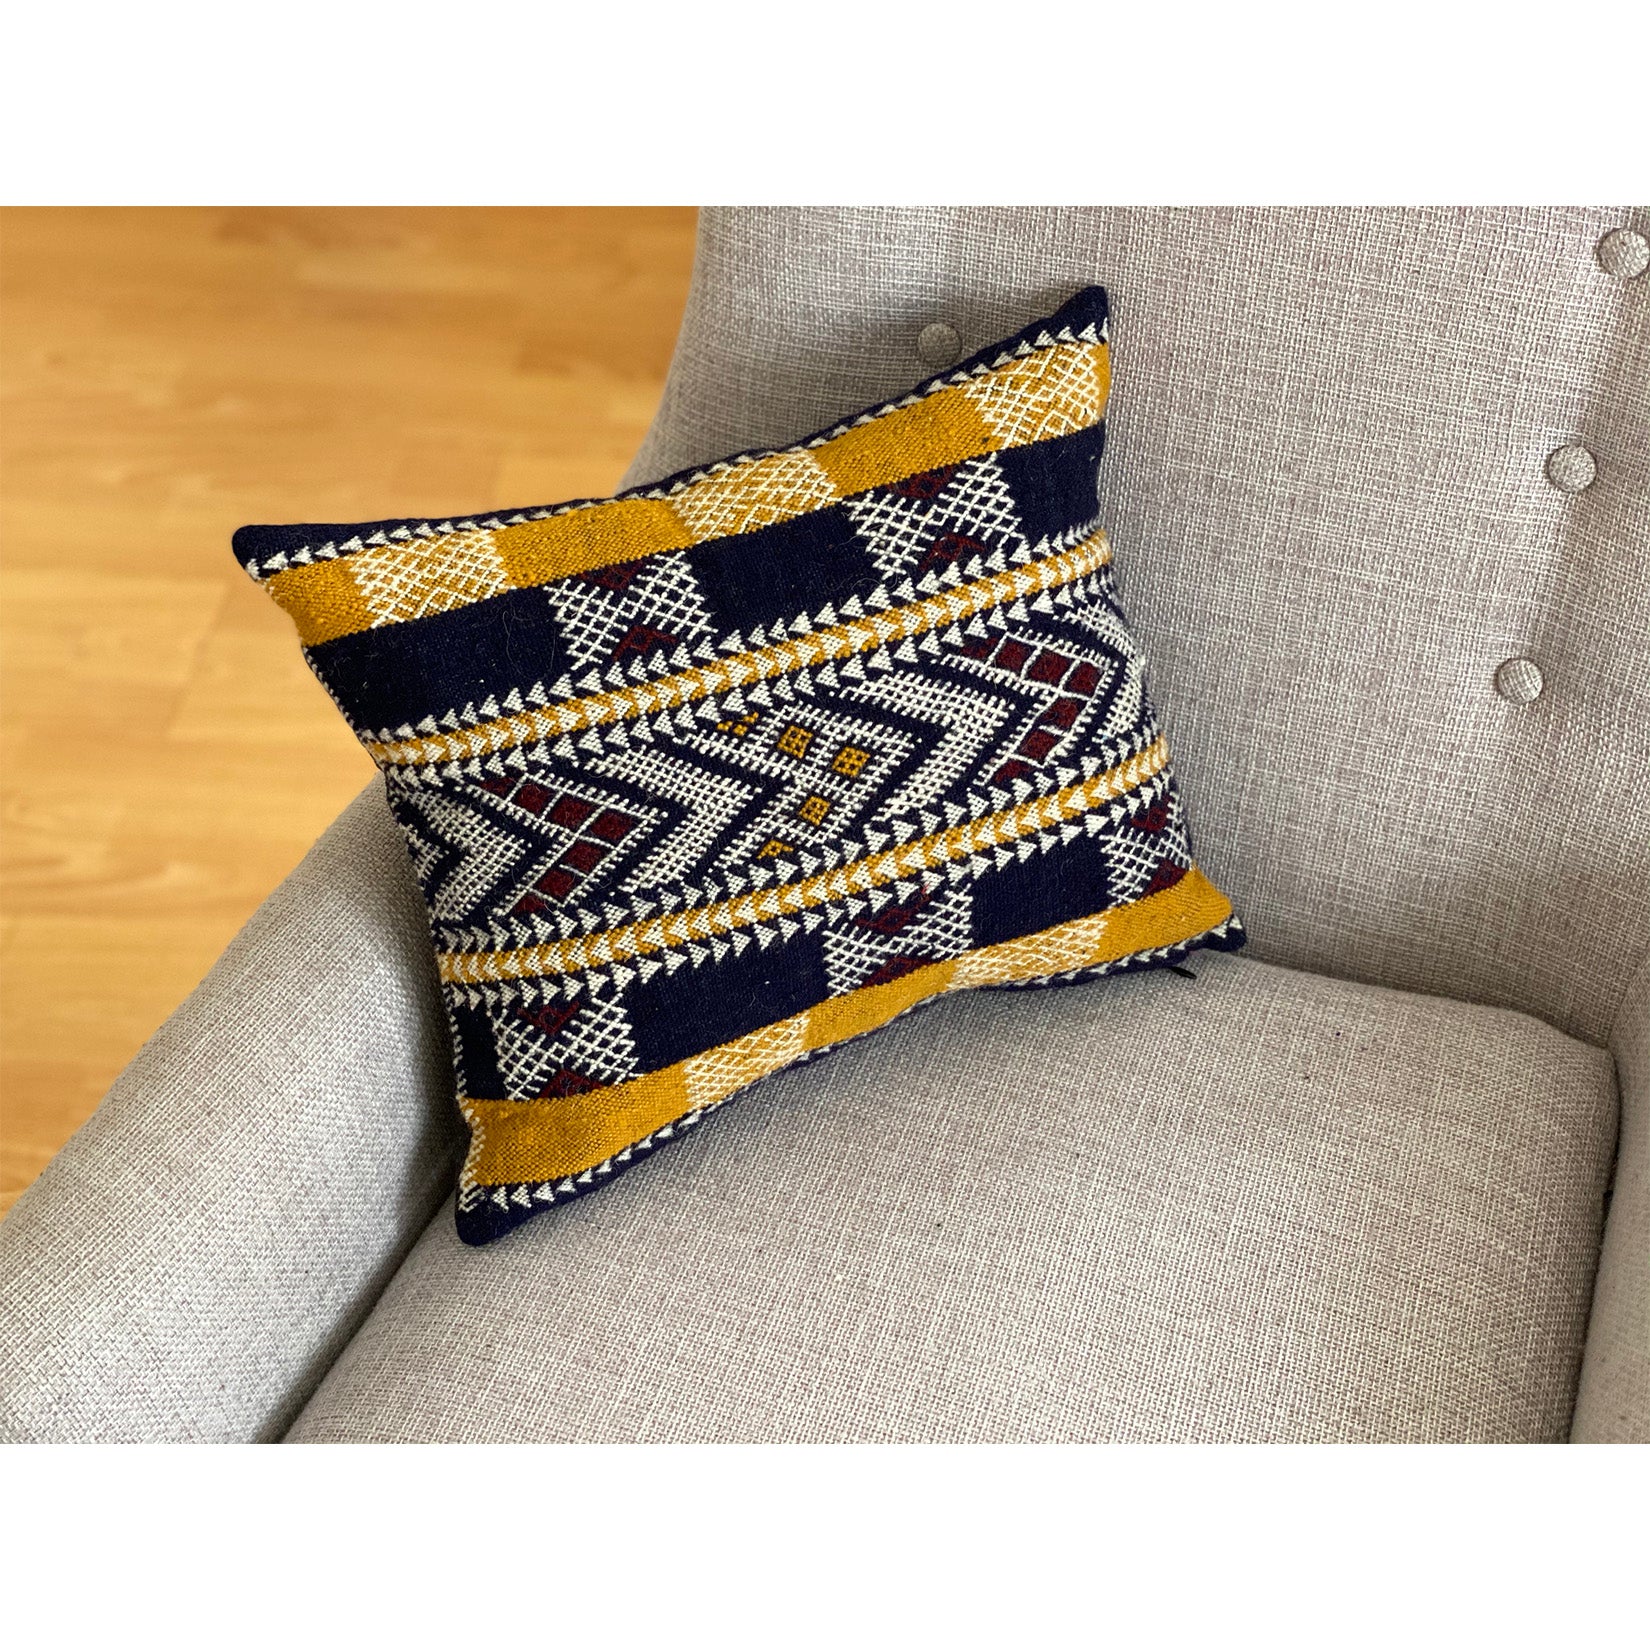 Black and mustard Moroccan pillow made by Kantara weavers in Morocco